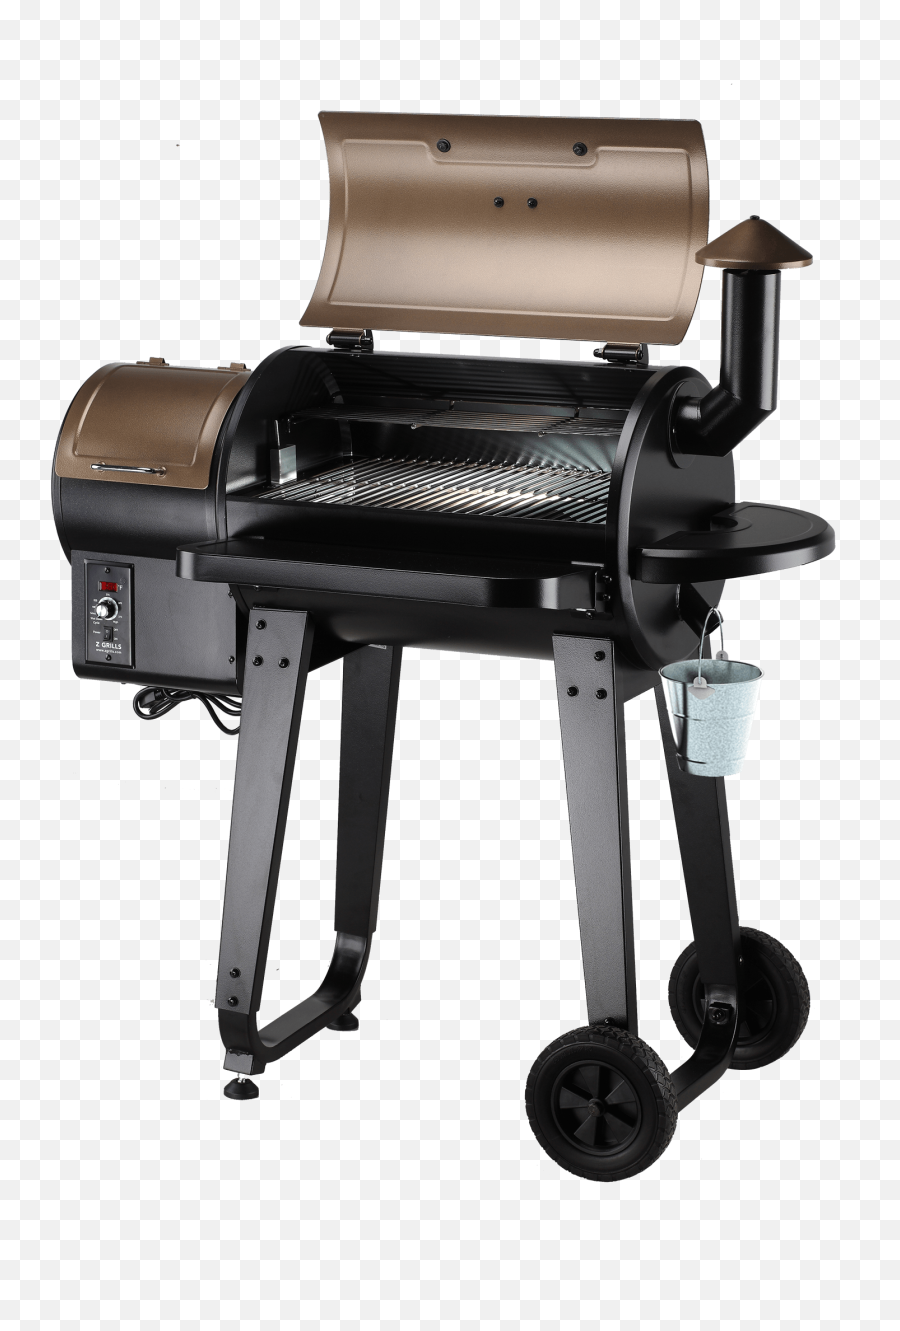 Z Grills Zpg - 450a Wood Pellet Barbecue Grill And Smoker With Digital Temperature Controls Perfect Family Size Backyard Bbq Grill Z Grill Pellet Grill Png,Bbq Transparent